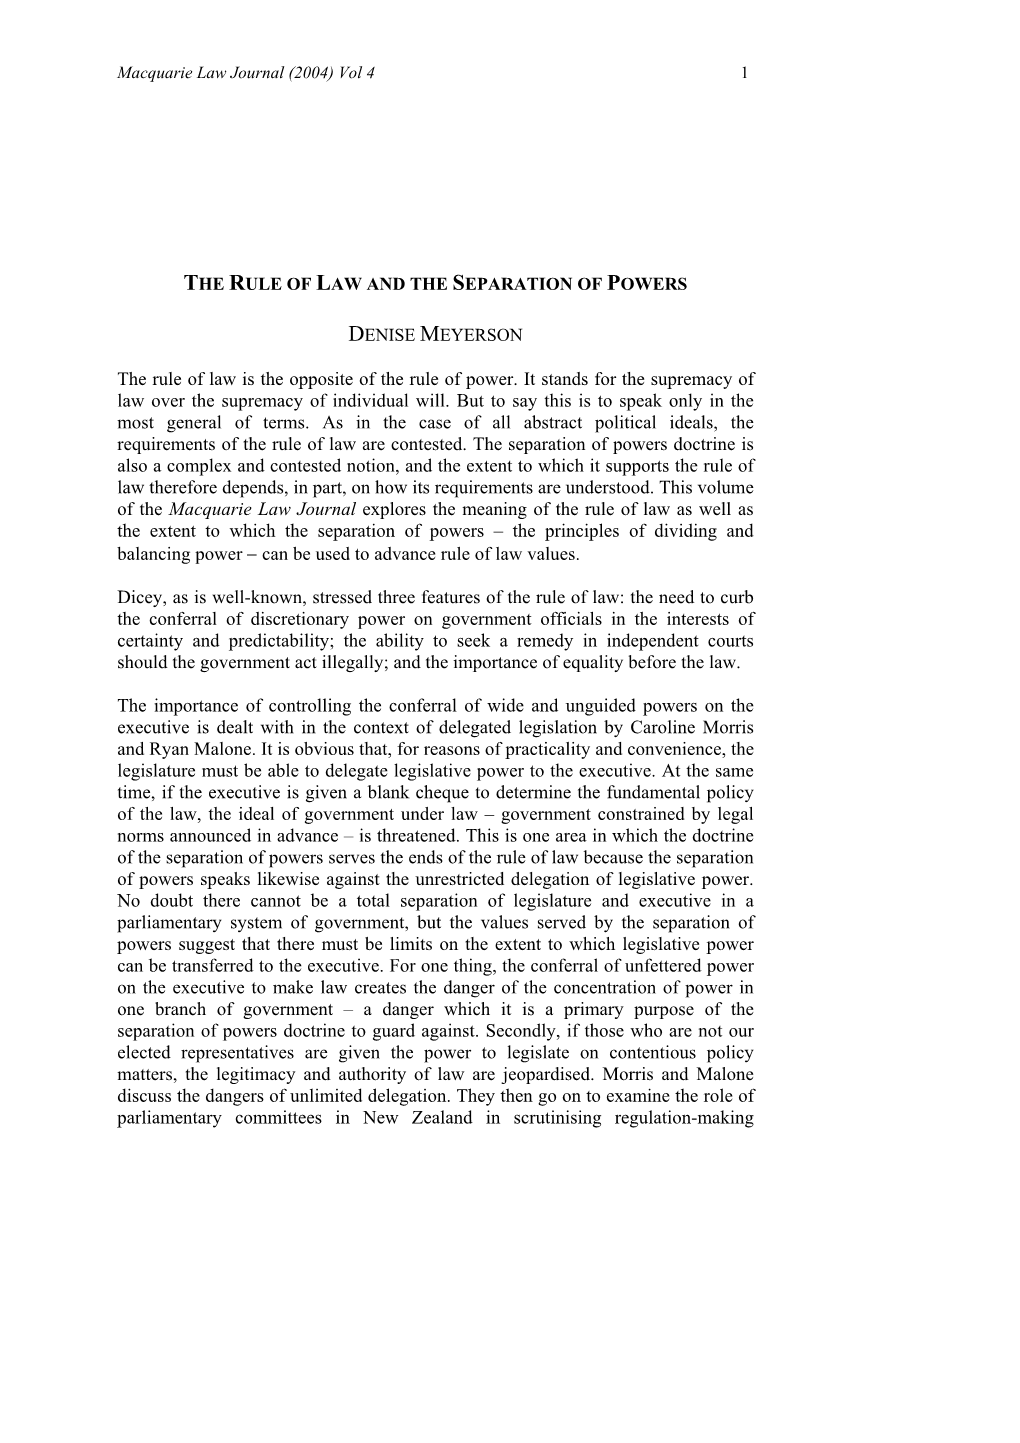 The Rule of Law and the Separation of Powers Denise Meyerson